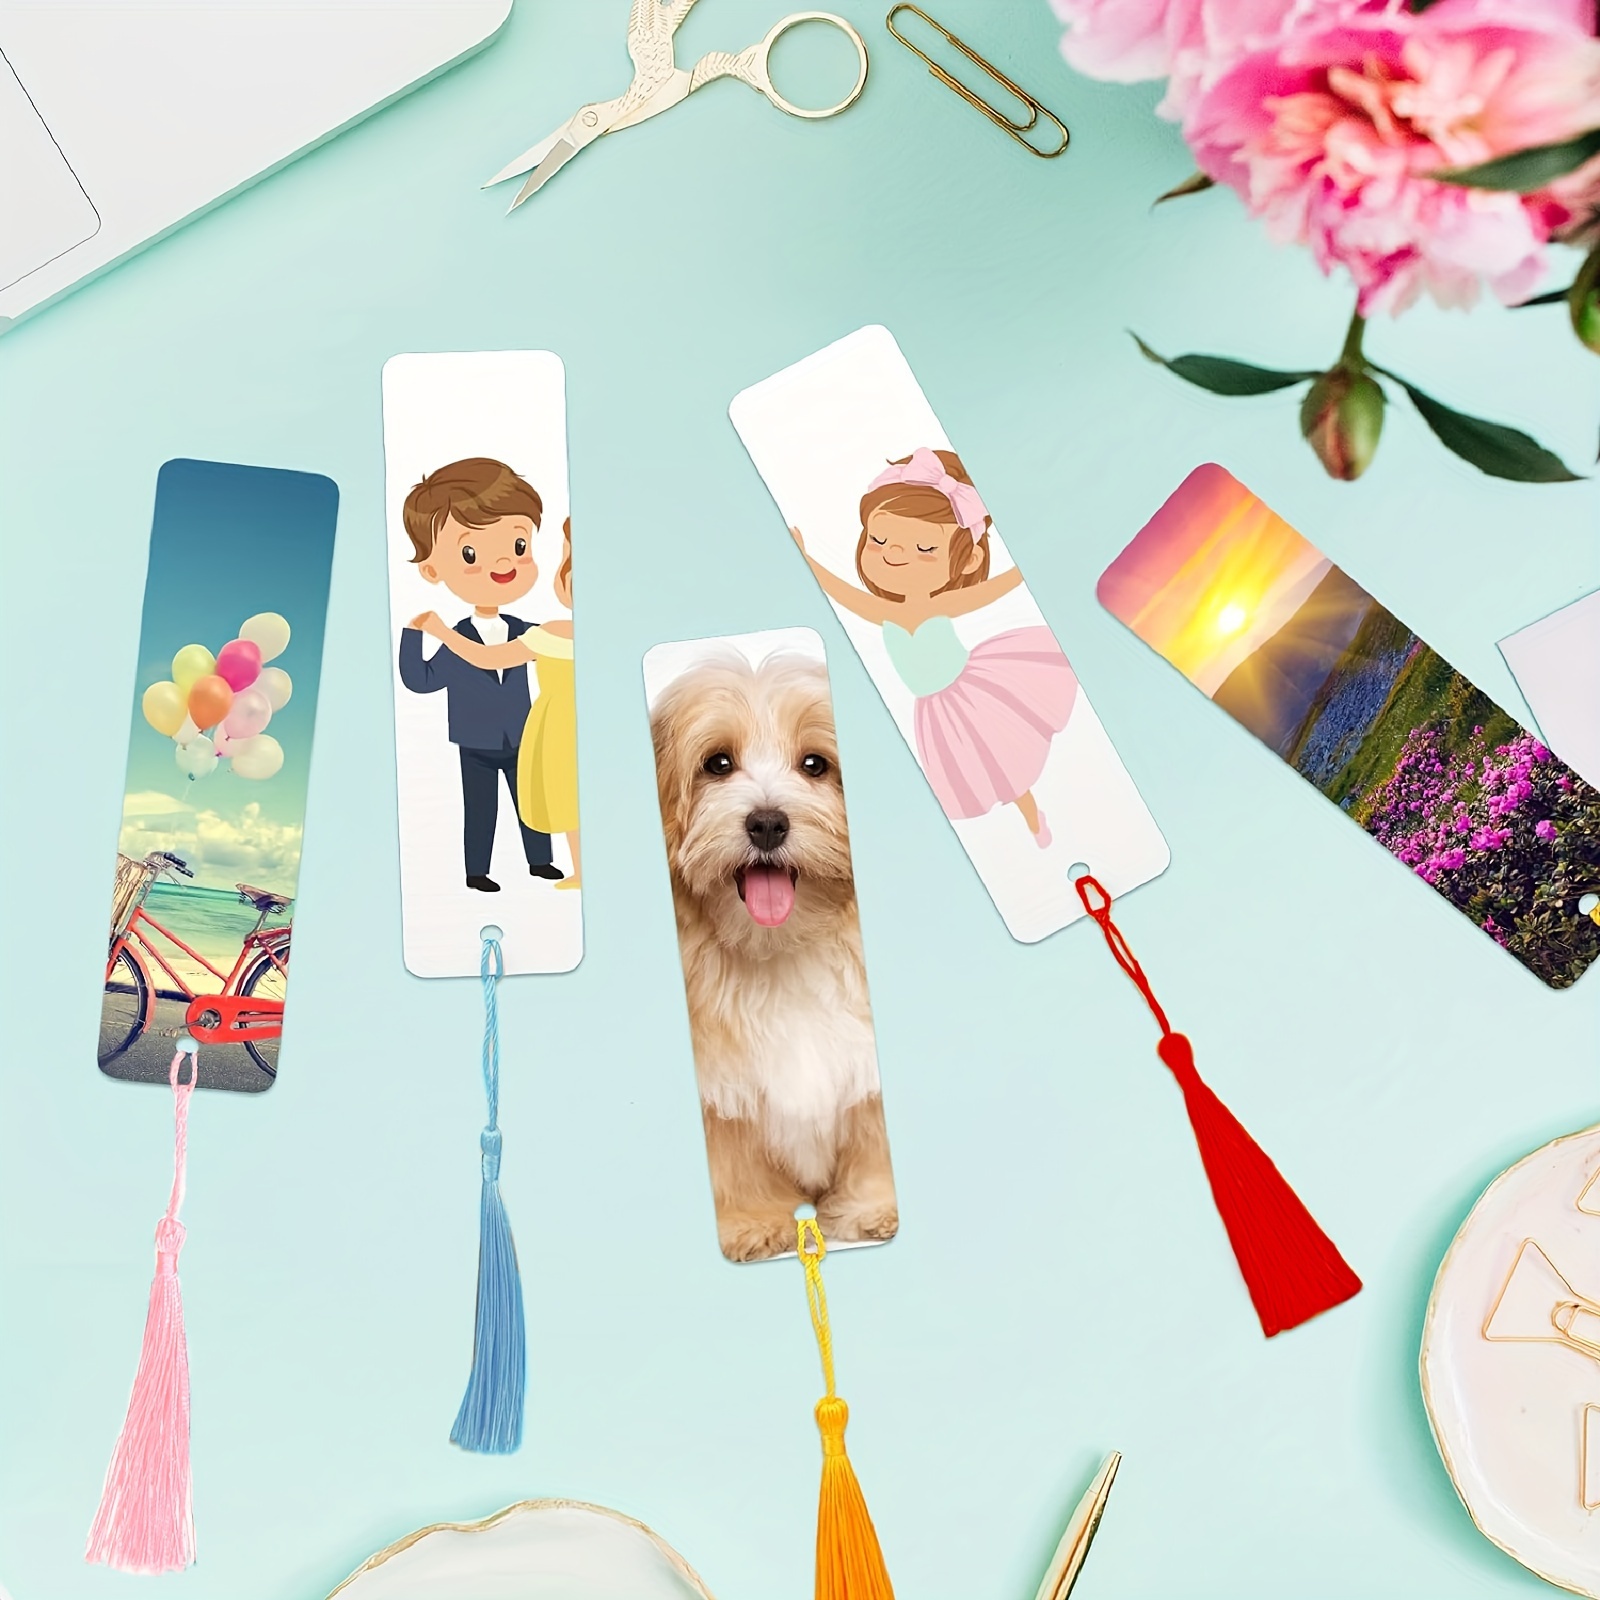 

6/12pcs Diy Sublimation Aluminum Bookmarks With Colorful Tassels - Perfect For Crafts, Birthdays & Weddings | Durable, Easy-to-customize Design